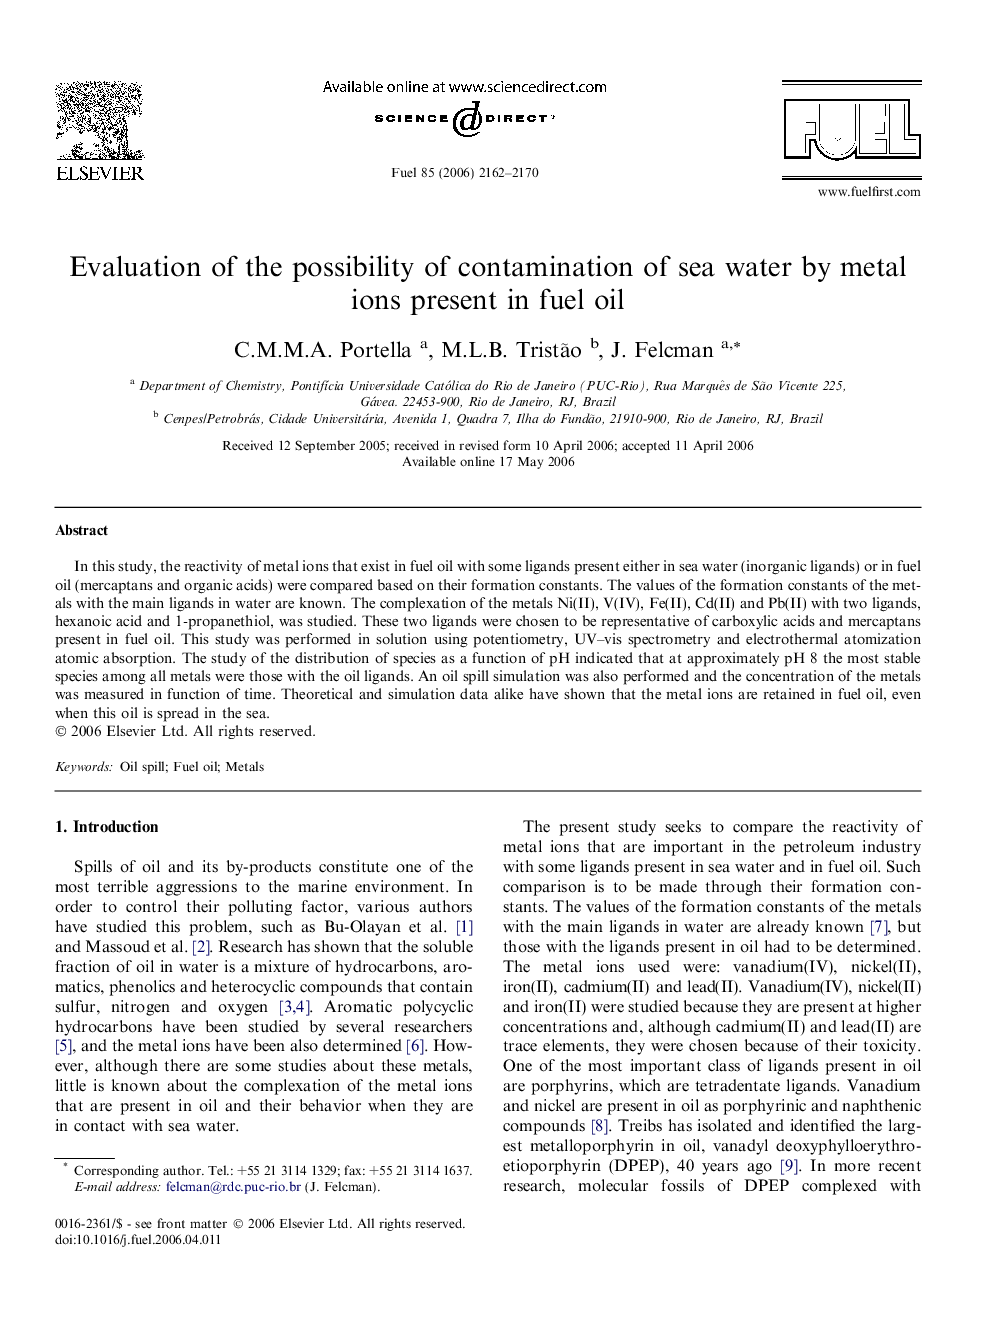 Evaluation of the possibility of contamination of sea water by metal ions present in fuel oil